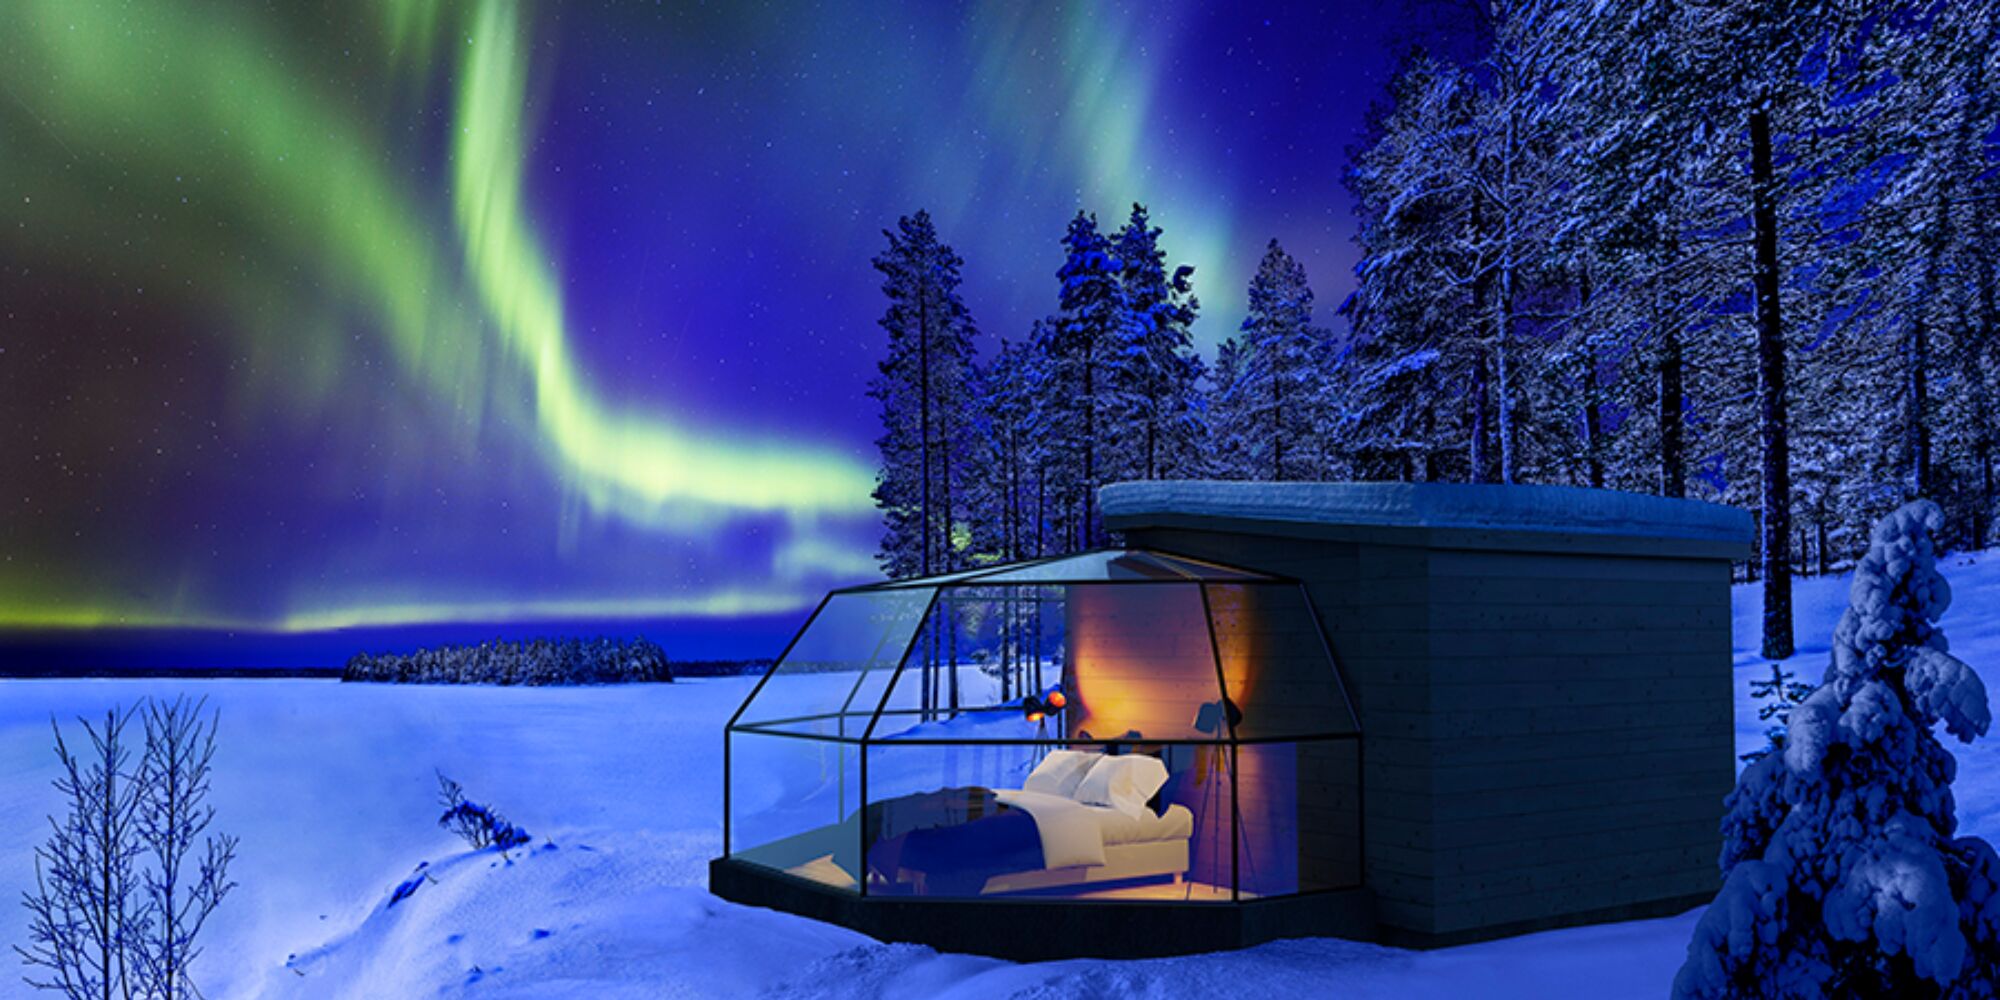 Accommodations with glass windows for viewing northern lights